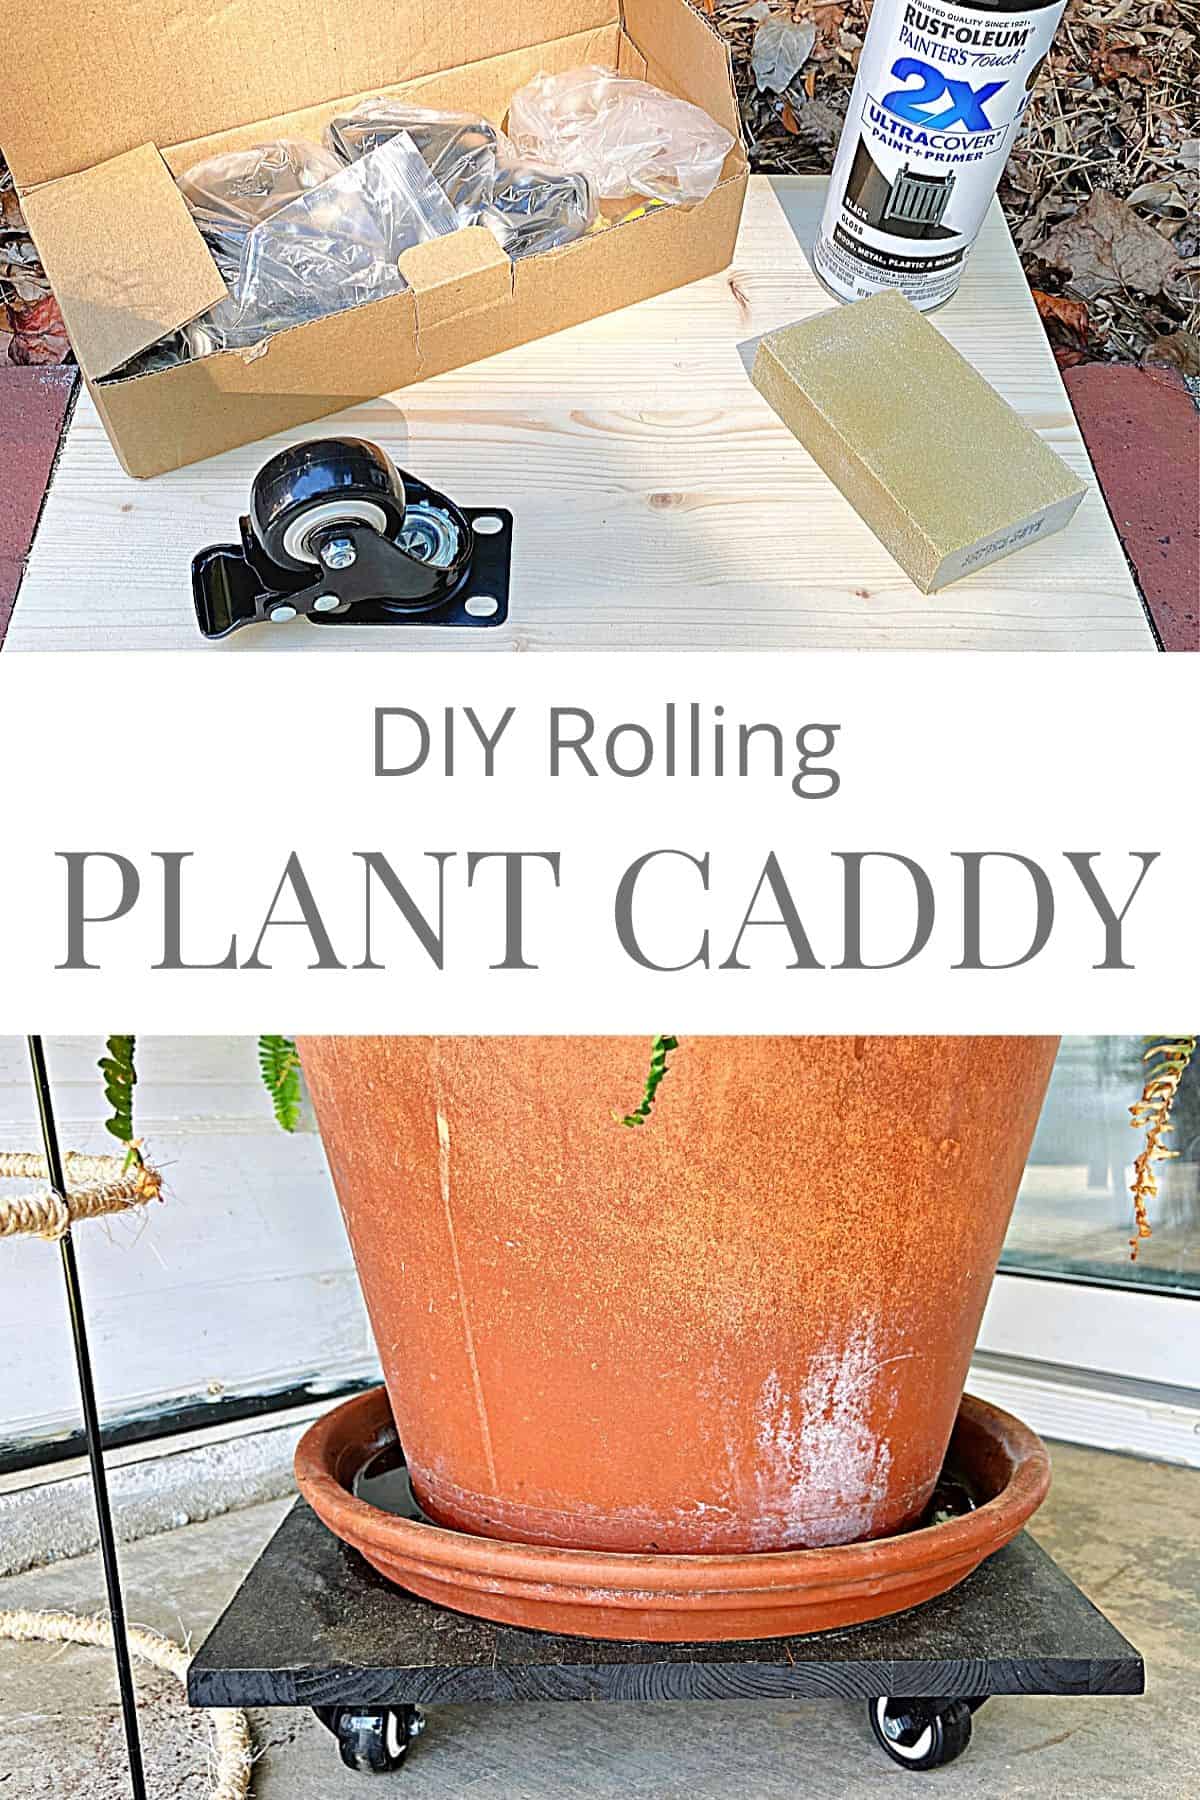 supplies to make a rolling plant caddy and pot on top of rolling plant caddy, plus pinterest graphic